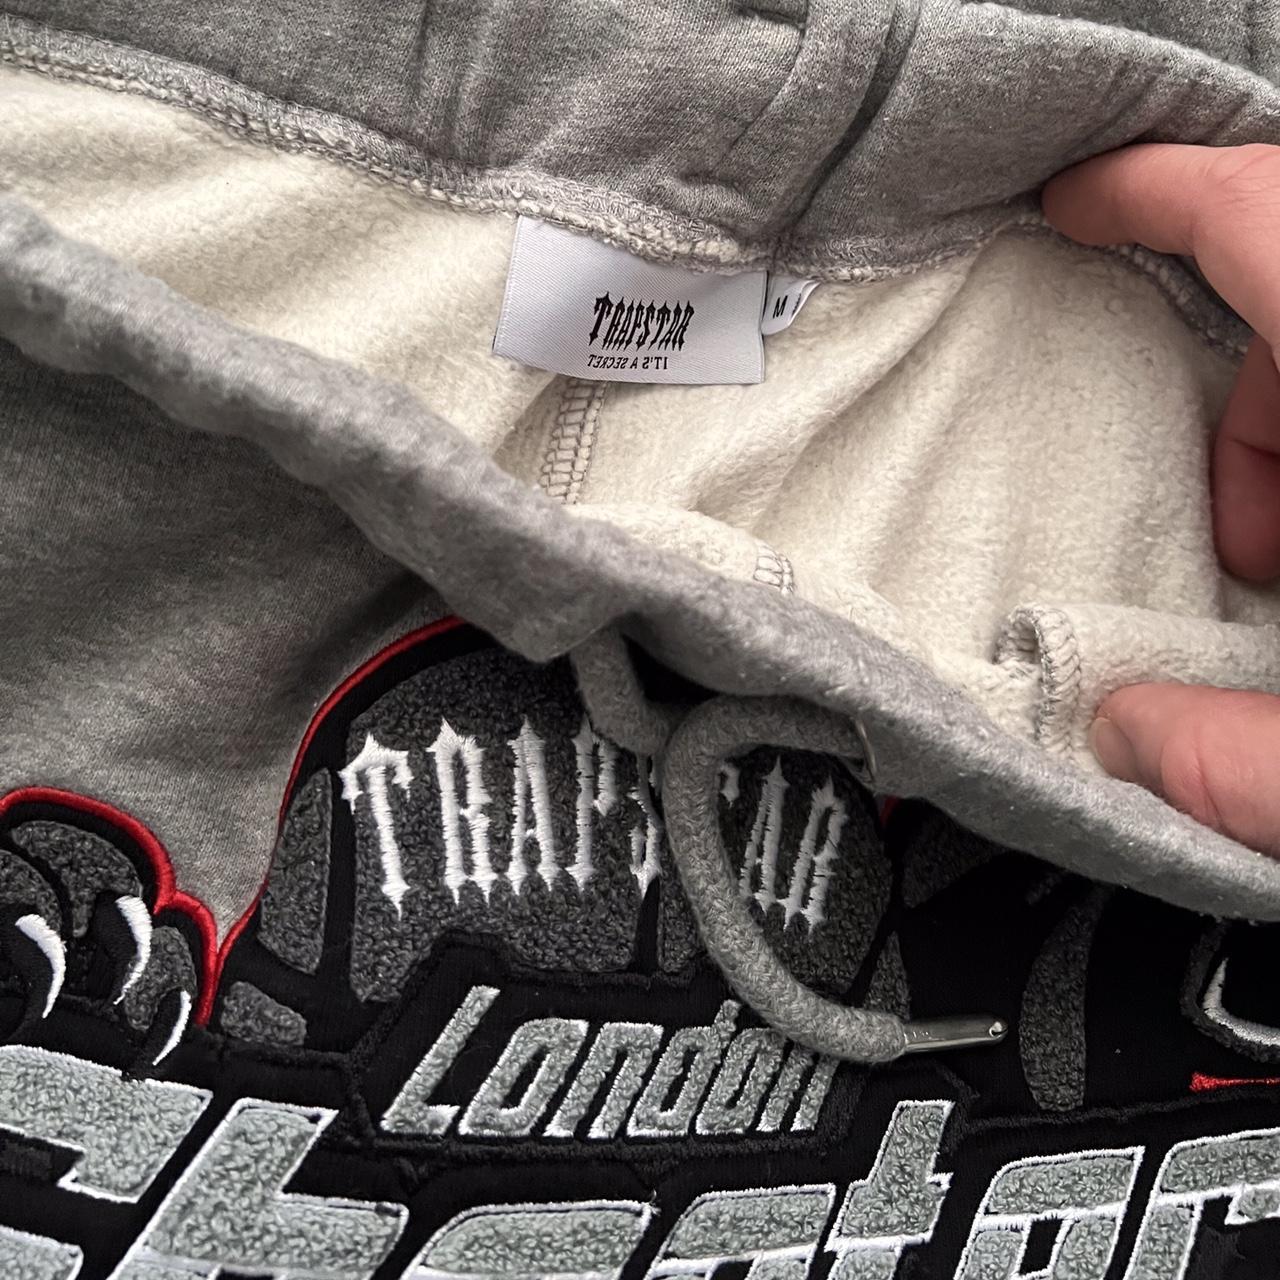 Trapstar Men's Grey and Red Hoodie | Depop